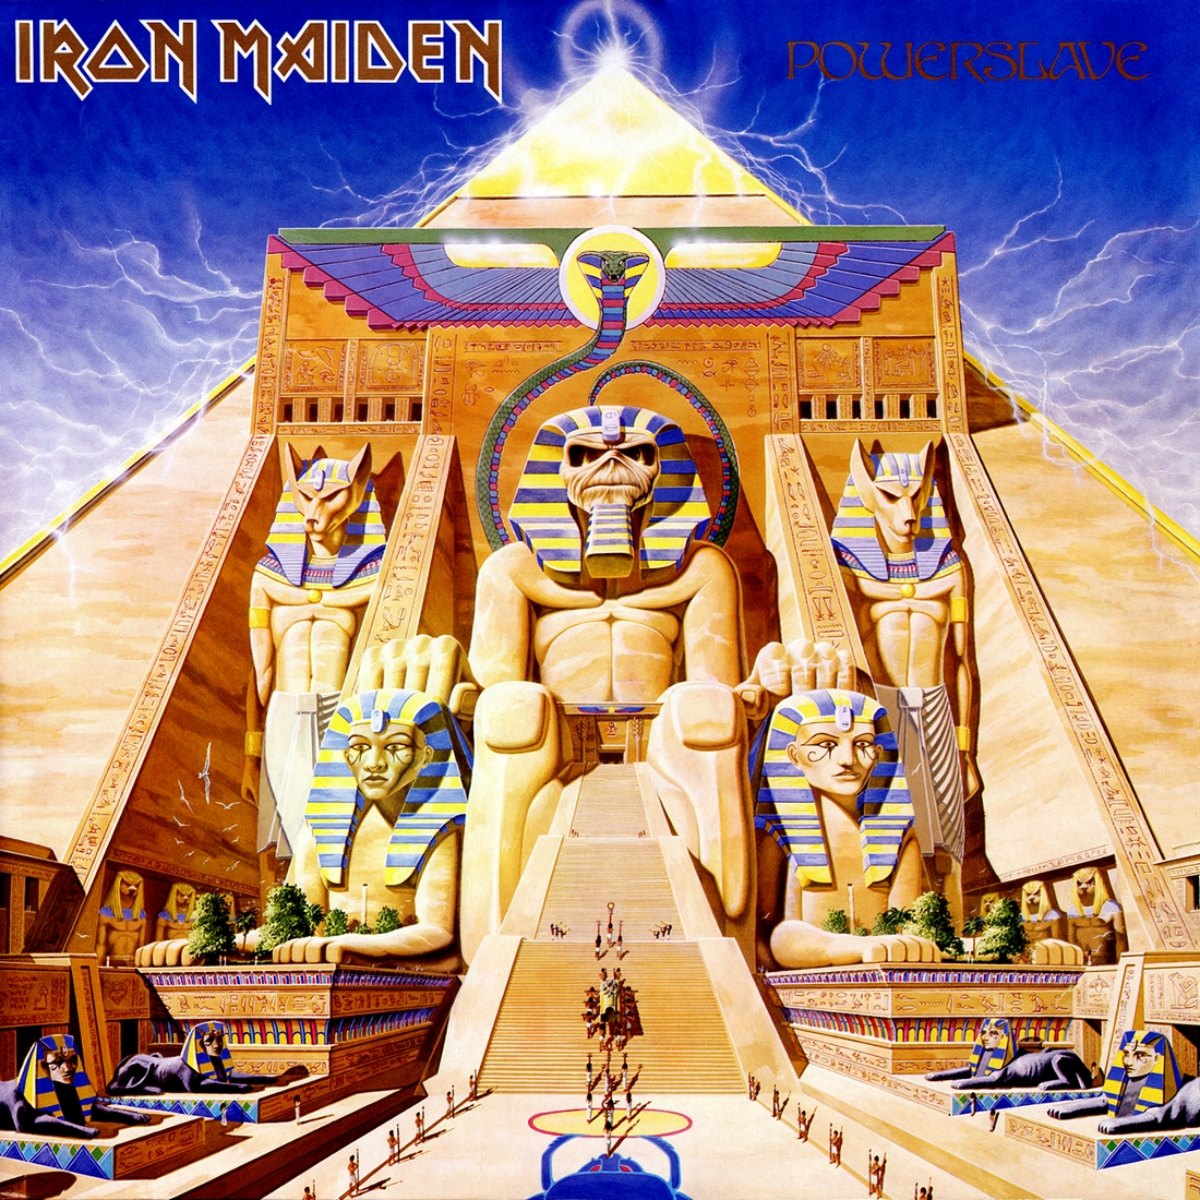 Cover of the album "Powerslave" by Iron Maiden